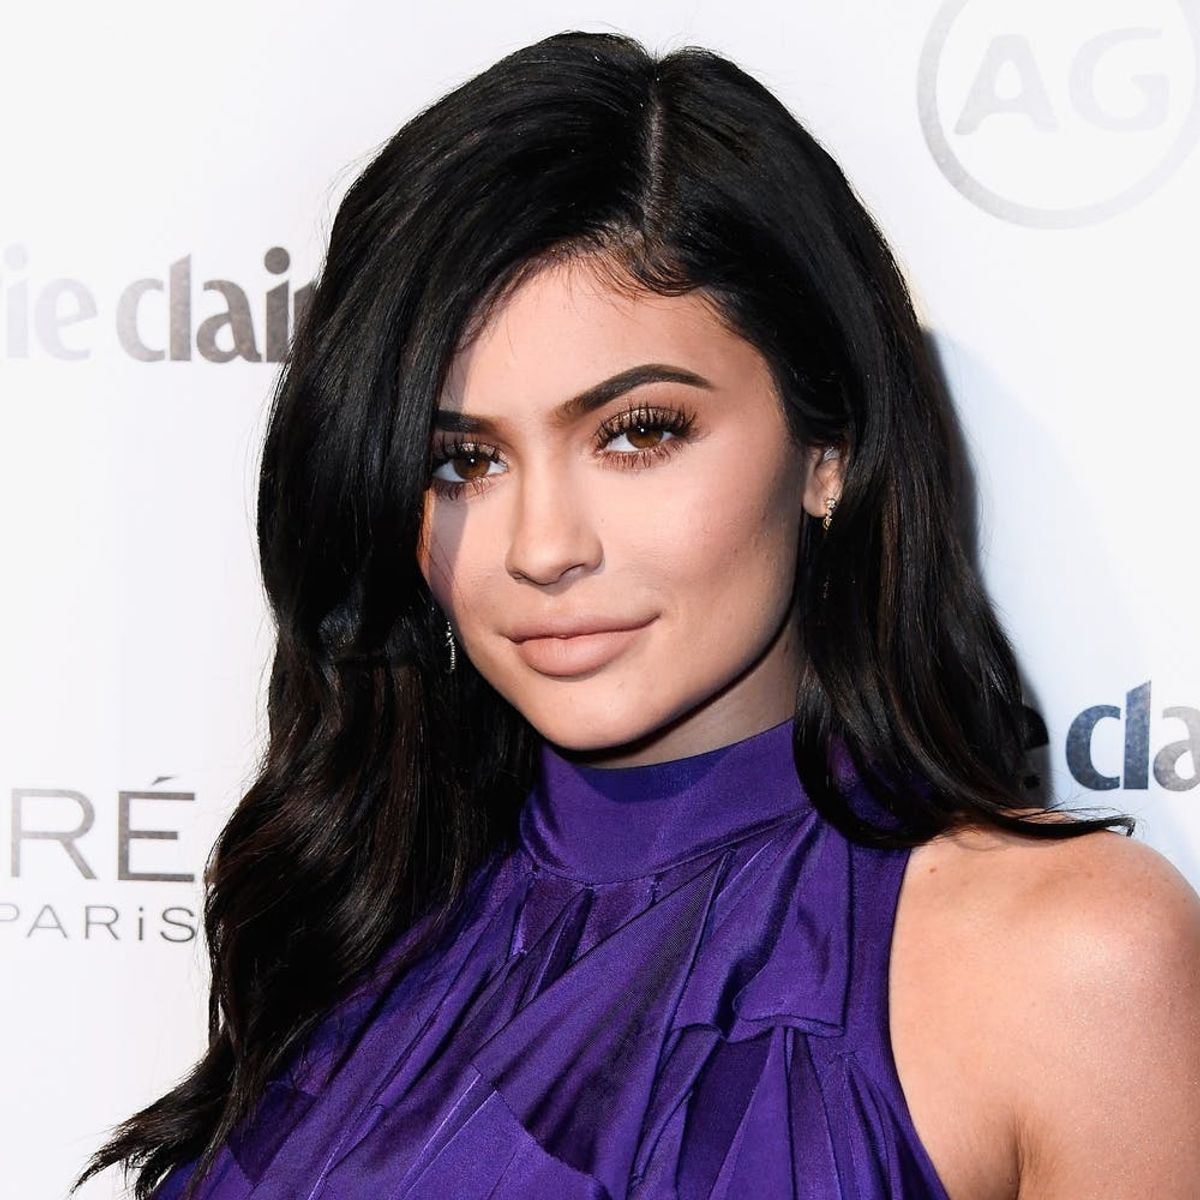 Kylie Jenner’s New Puma Sneakers Are Dance-Inspired